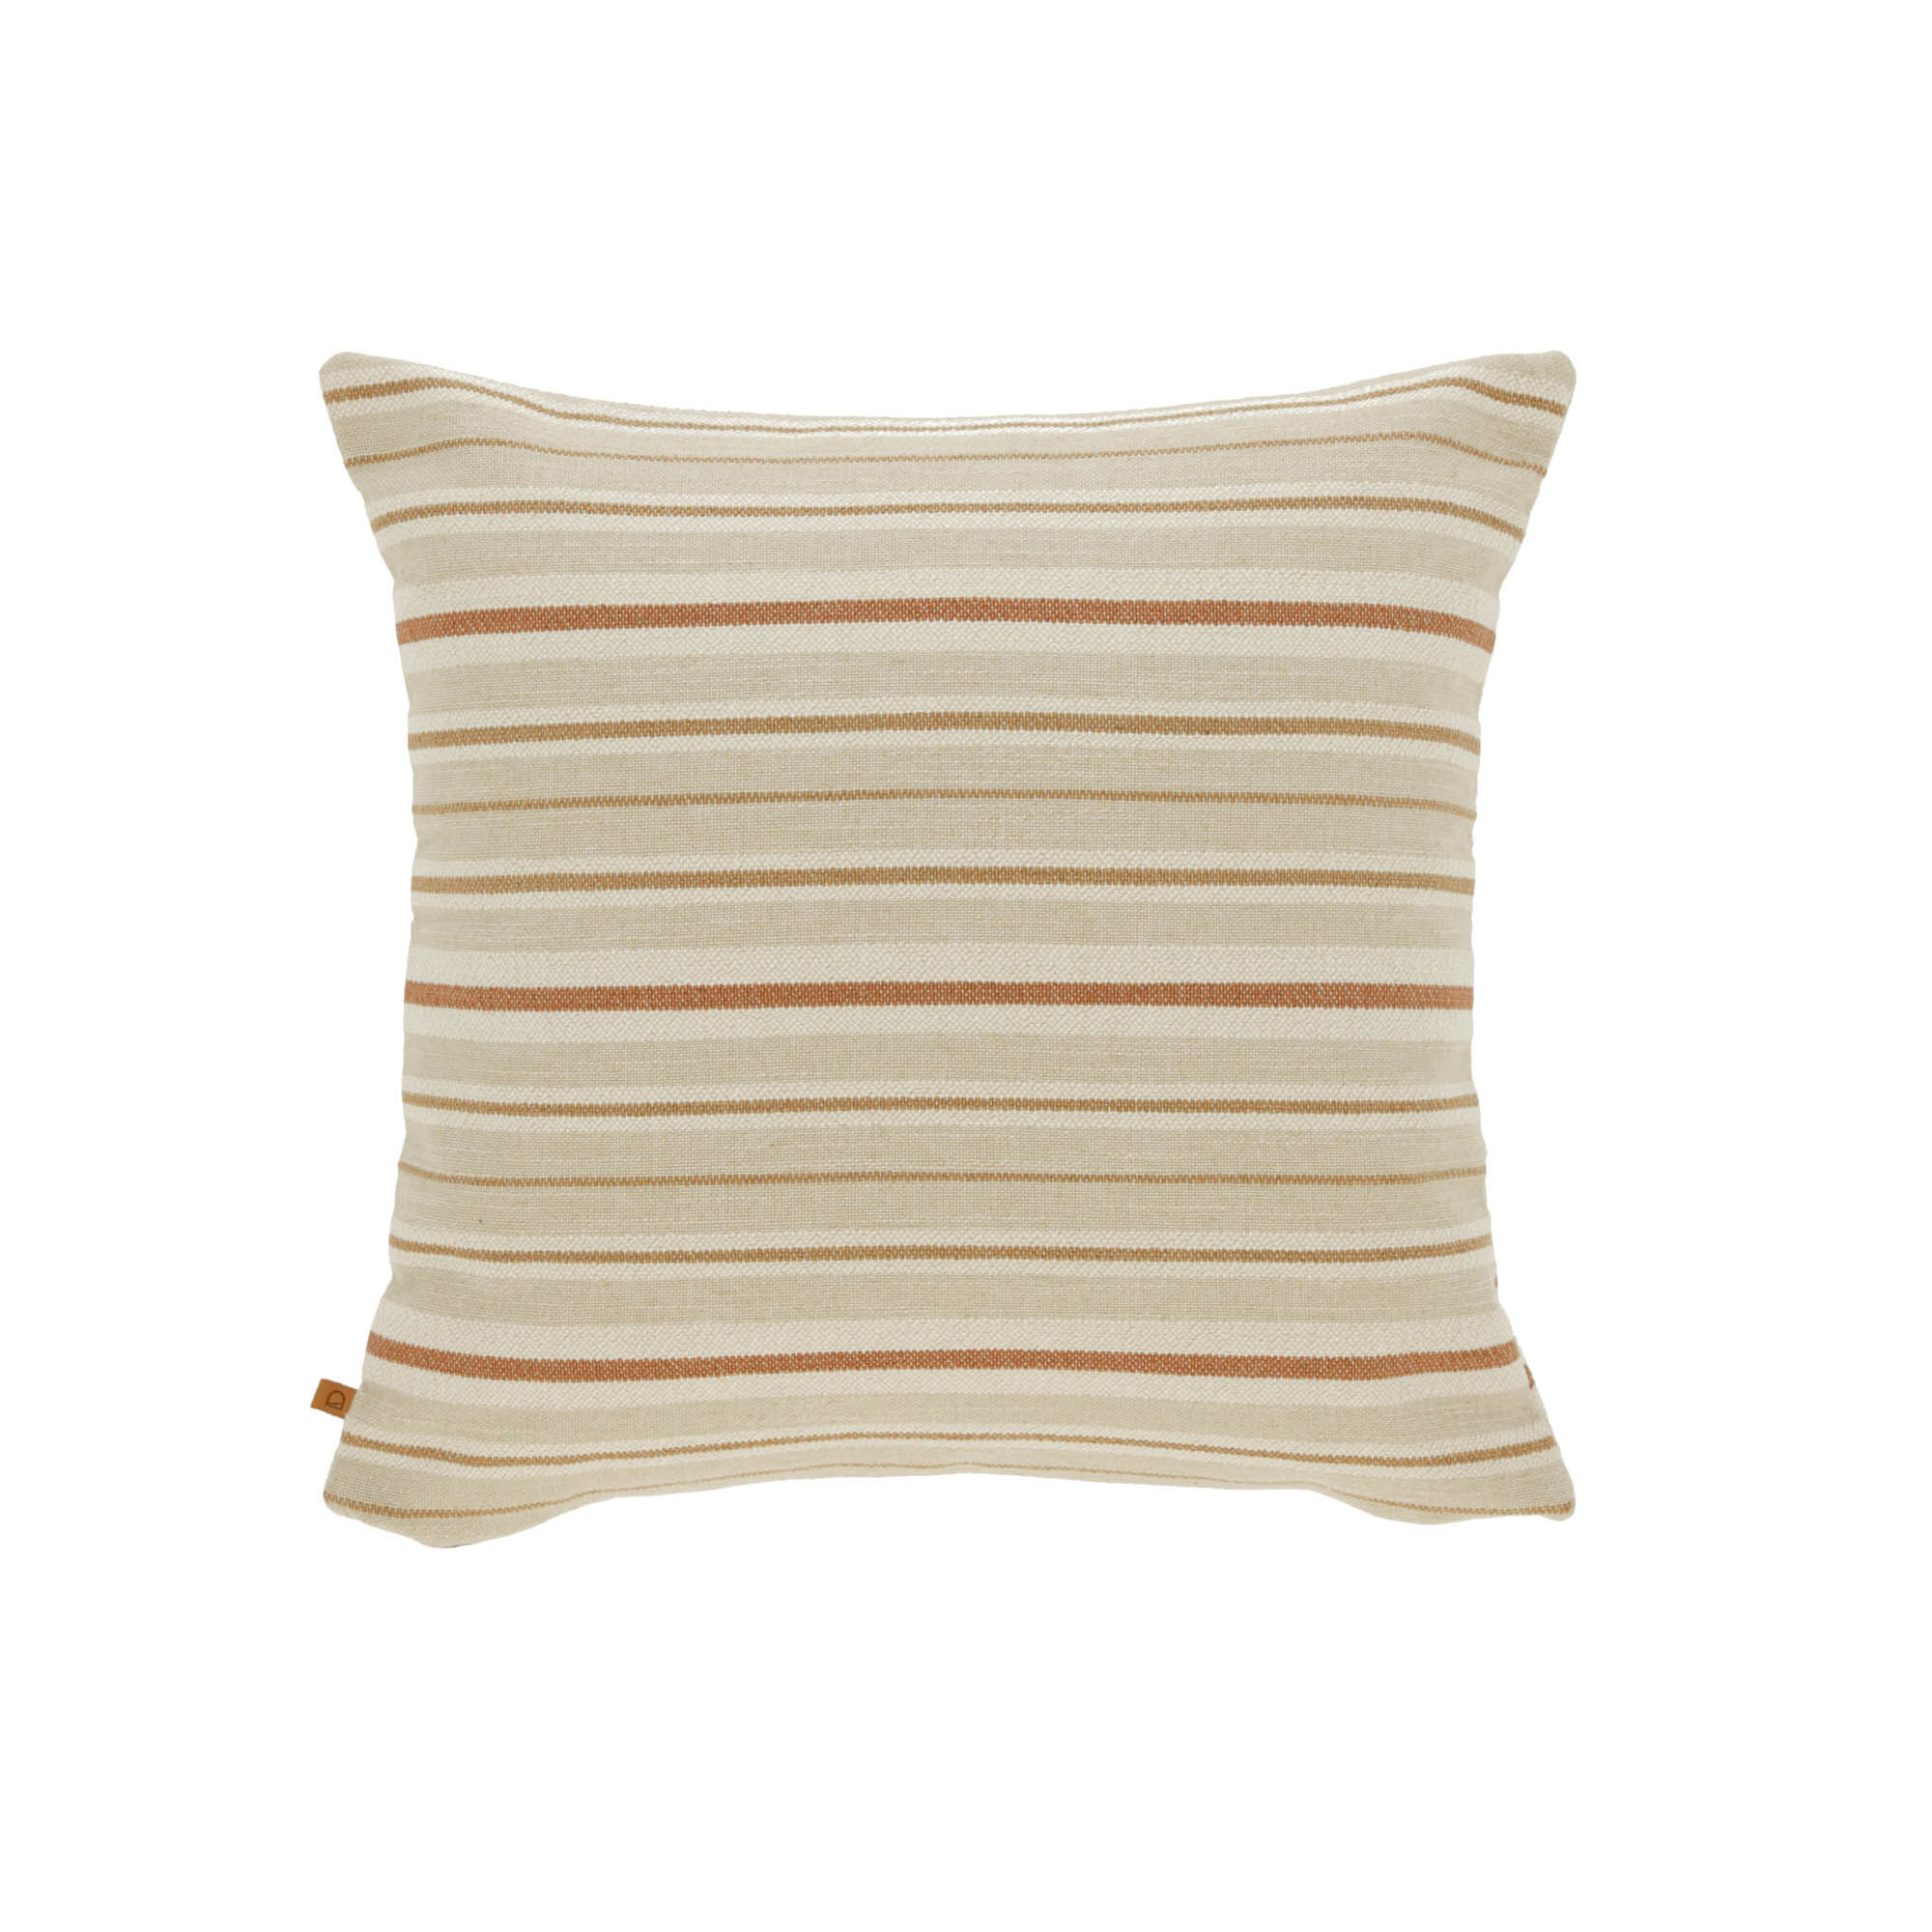 Kave Home Fodera cuscino Sydelle 45 x 45 cm a righe beige